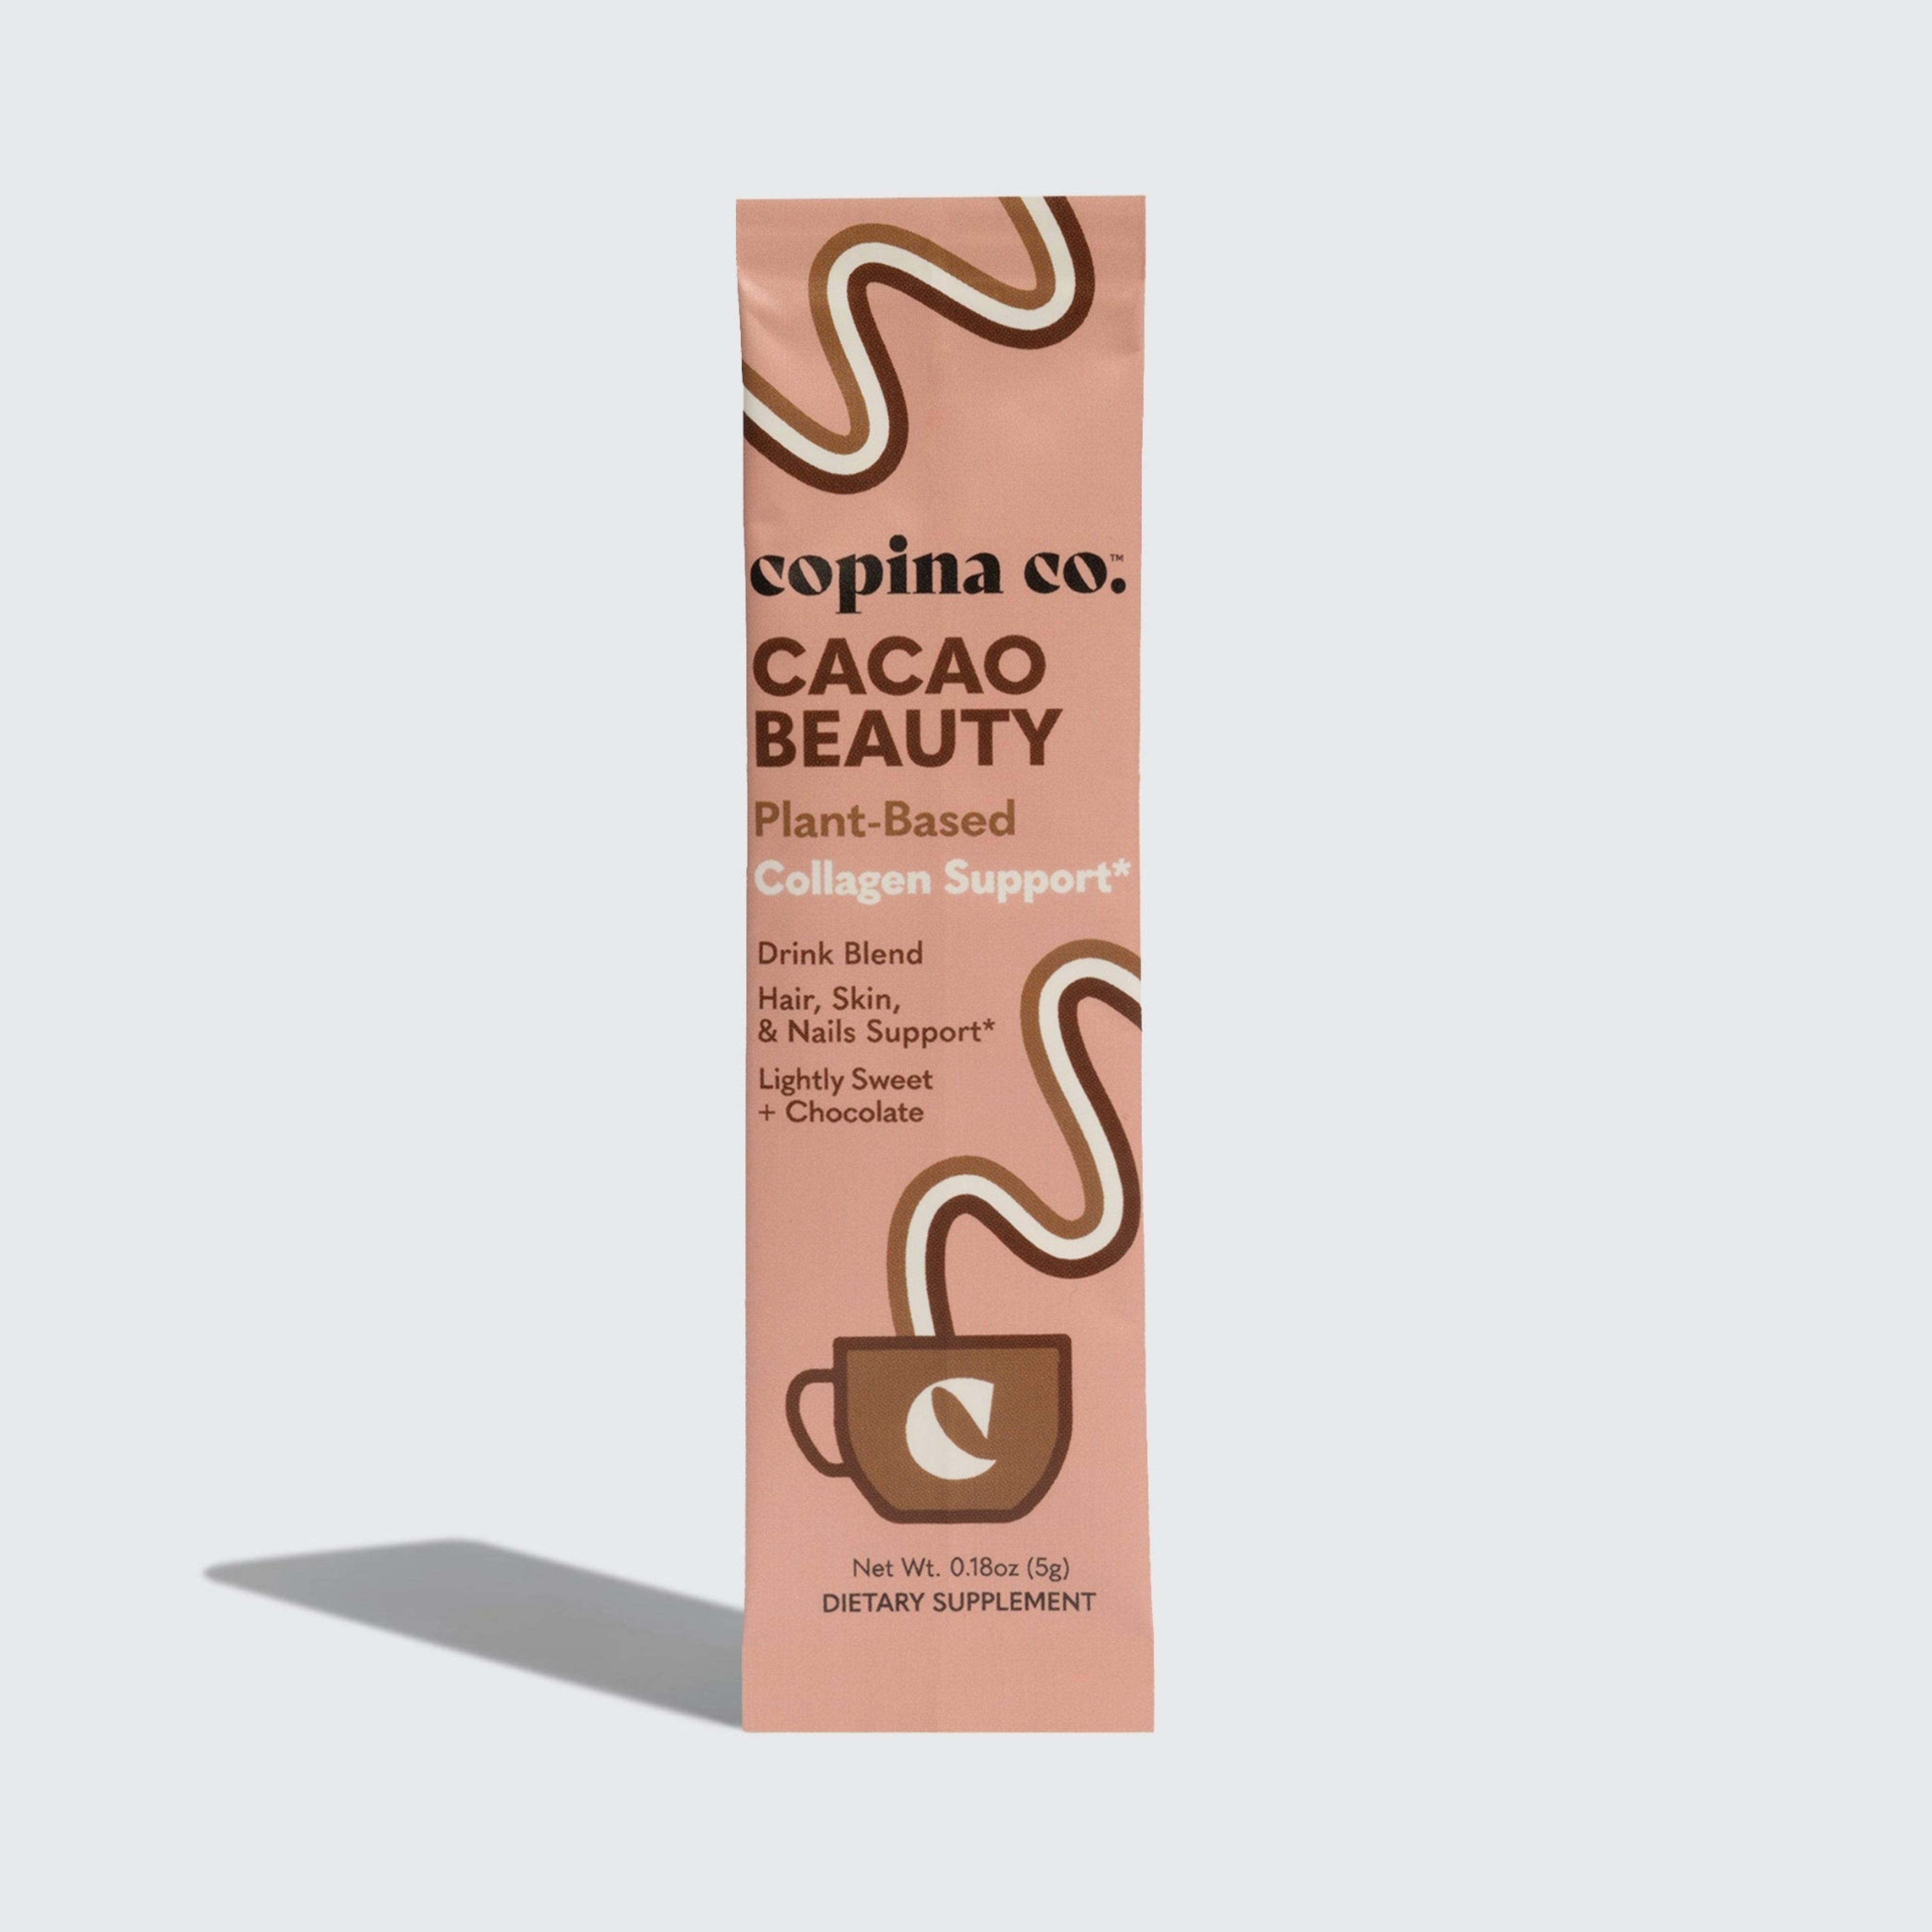 Cacao Beauty Plant-Based Collagen Support Drink Blend Stick Packs